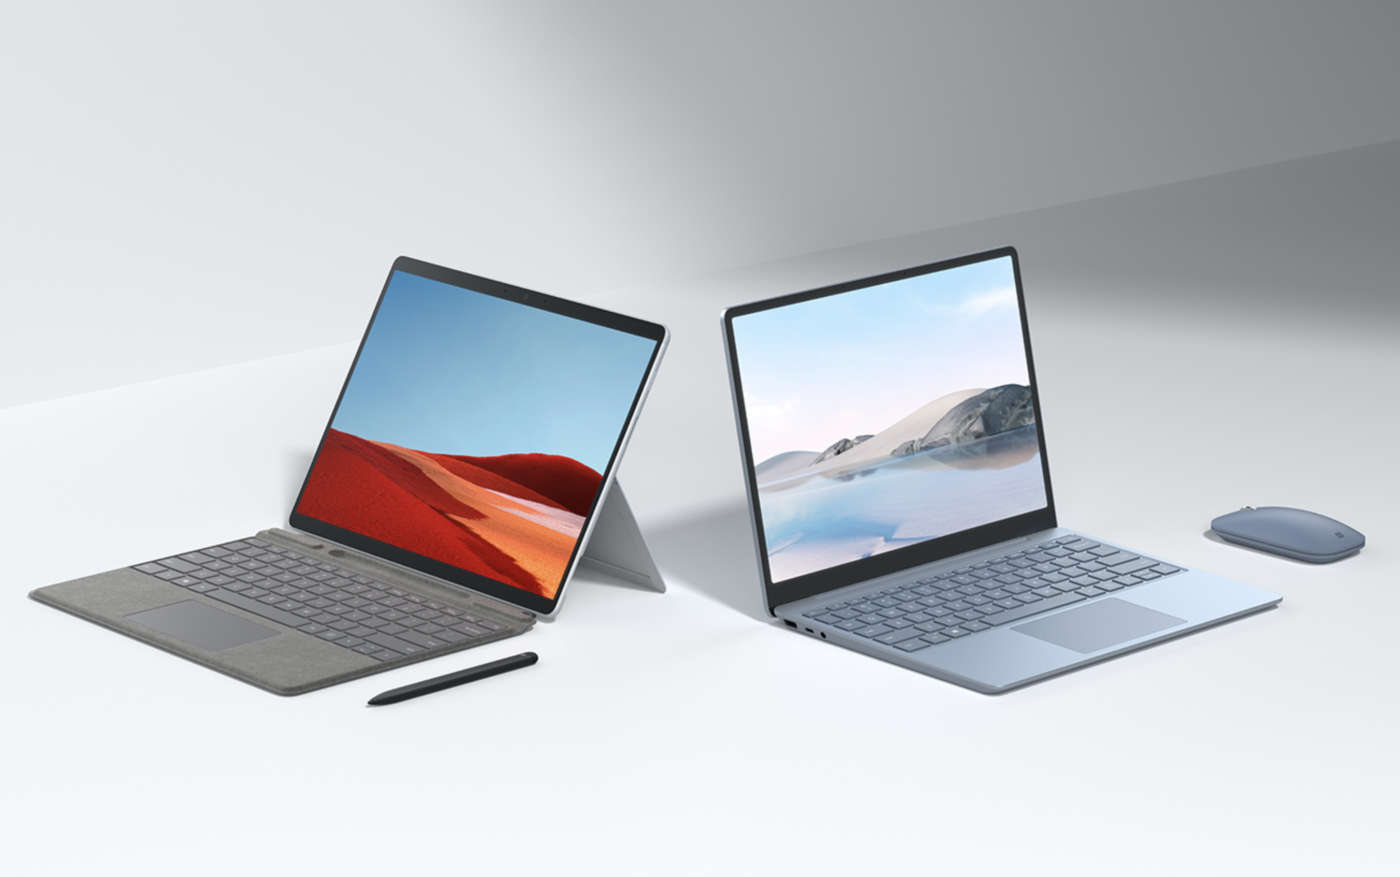 Microsoft Surface Go Laptop : Microsoft Surface Laptop Go - Review 2020 - PCMag Australia - Starting at £549, it comes in below the £999 surface laptop 3 and £799 surface pro 7, but above the £399 surface go 2 tablet.